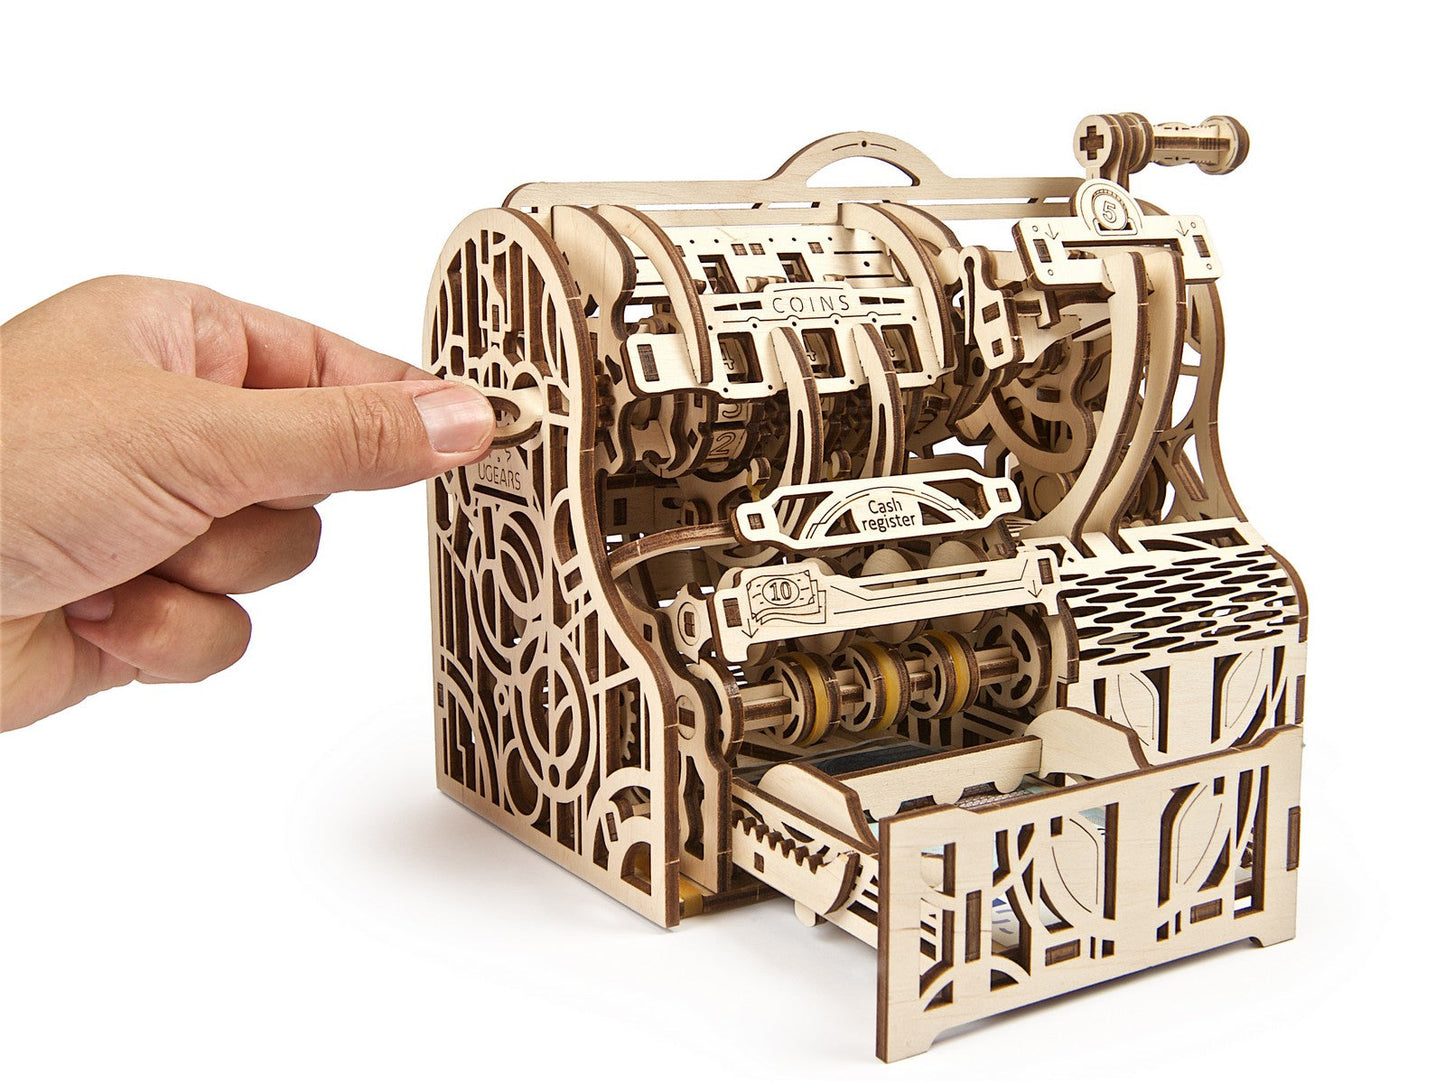 Ugears Cash Register ★Mechanical 3D Puzzle Kit Model Toys Gift Present Birthday Xmas Christmas Kids Adults